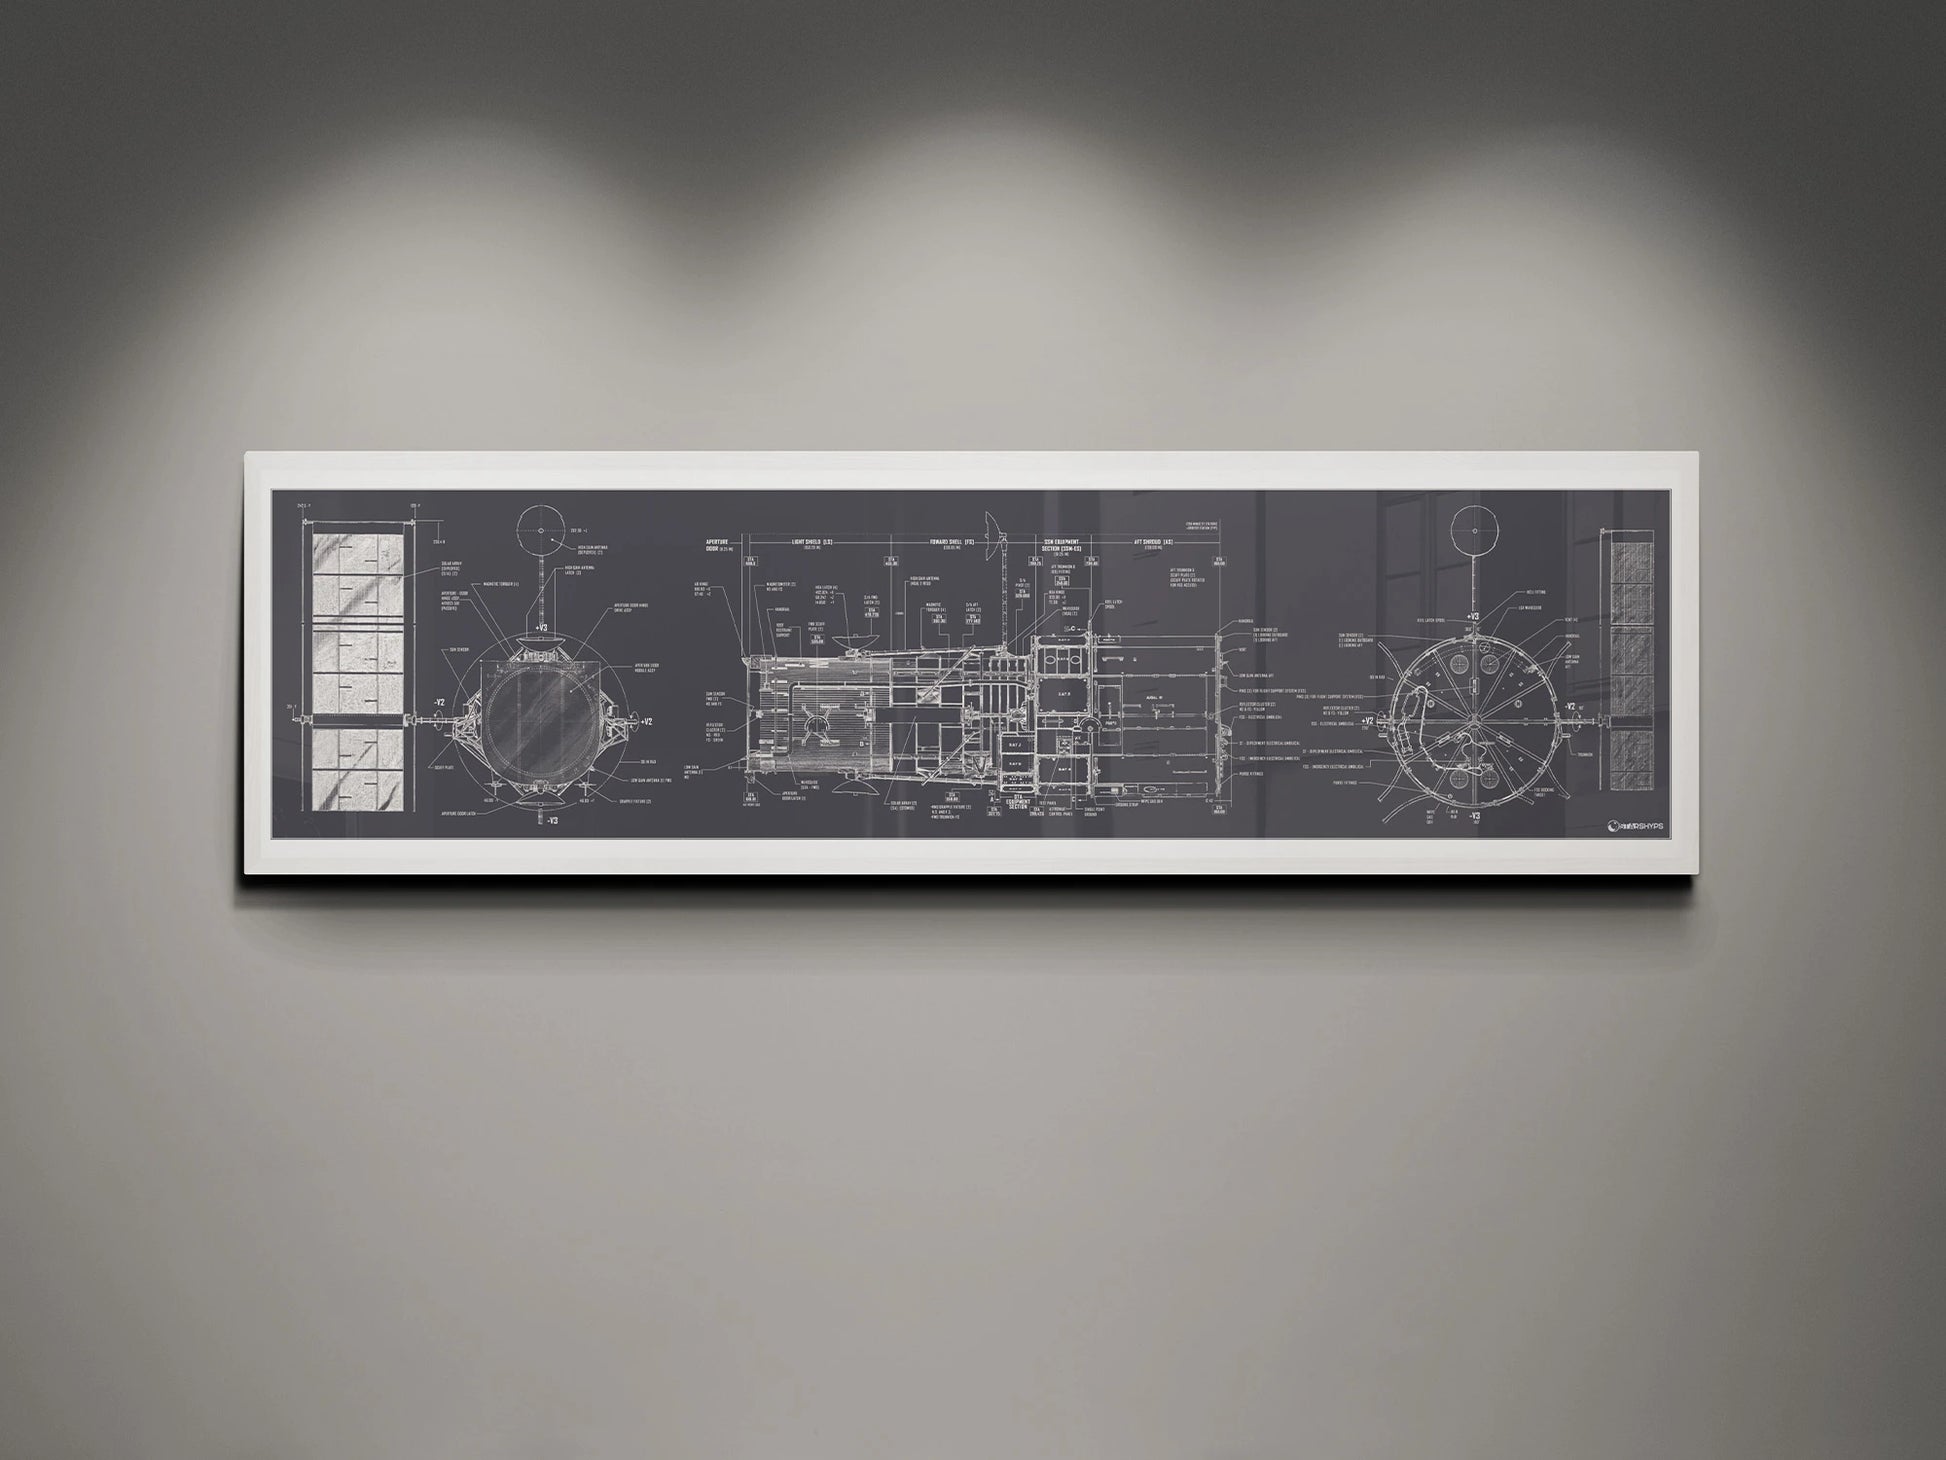 Hubble Space Telescope Blueprint | Rocket Blueprint Posters | A white-framed detailed blueprint of the NASA Hubble Space Telescope, showcasing technical schematics in white on a charcoal background. The blueprint is displayed on a gray wall, illuminated by soft overhead lights.